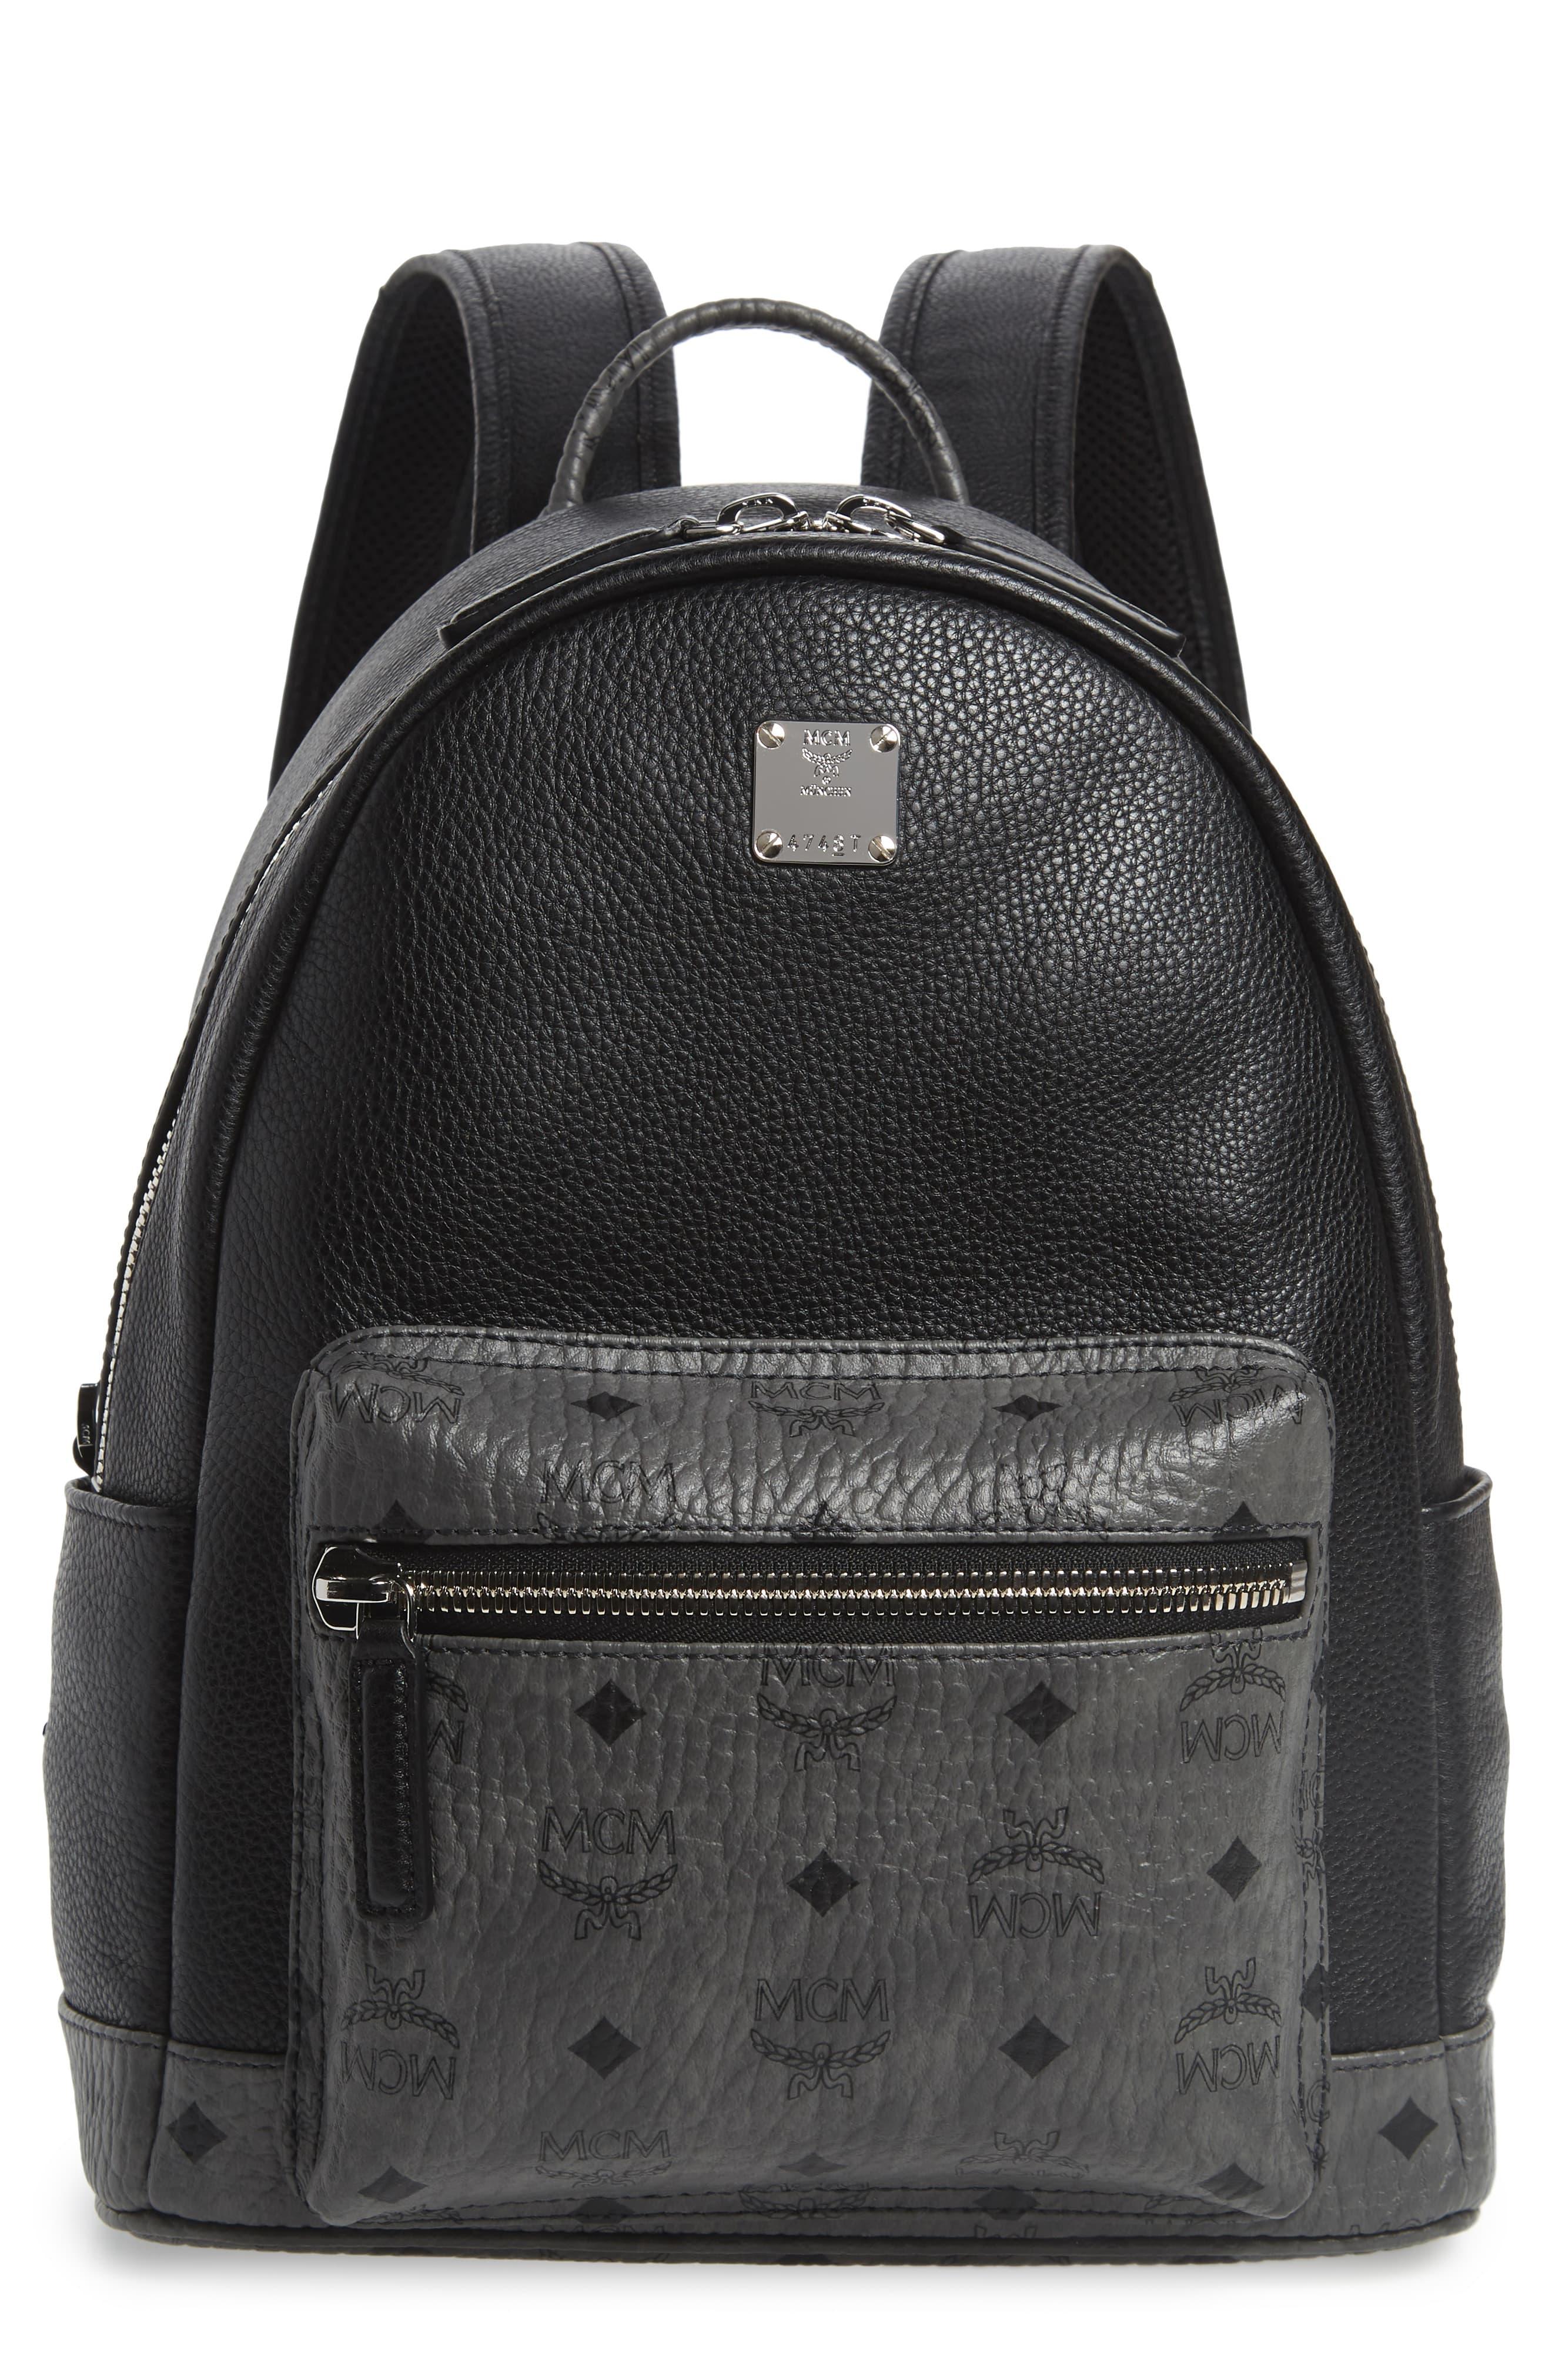 MCM Small Leather & Visetos Canvas Backpack in Black - Lyst